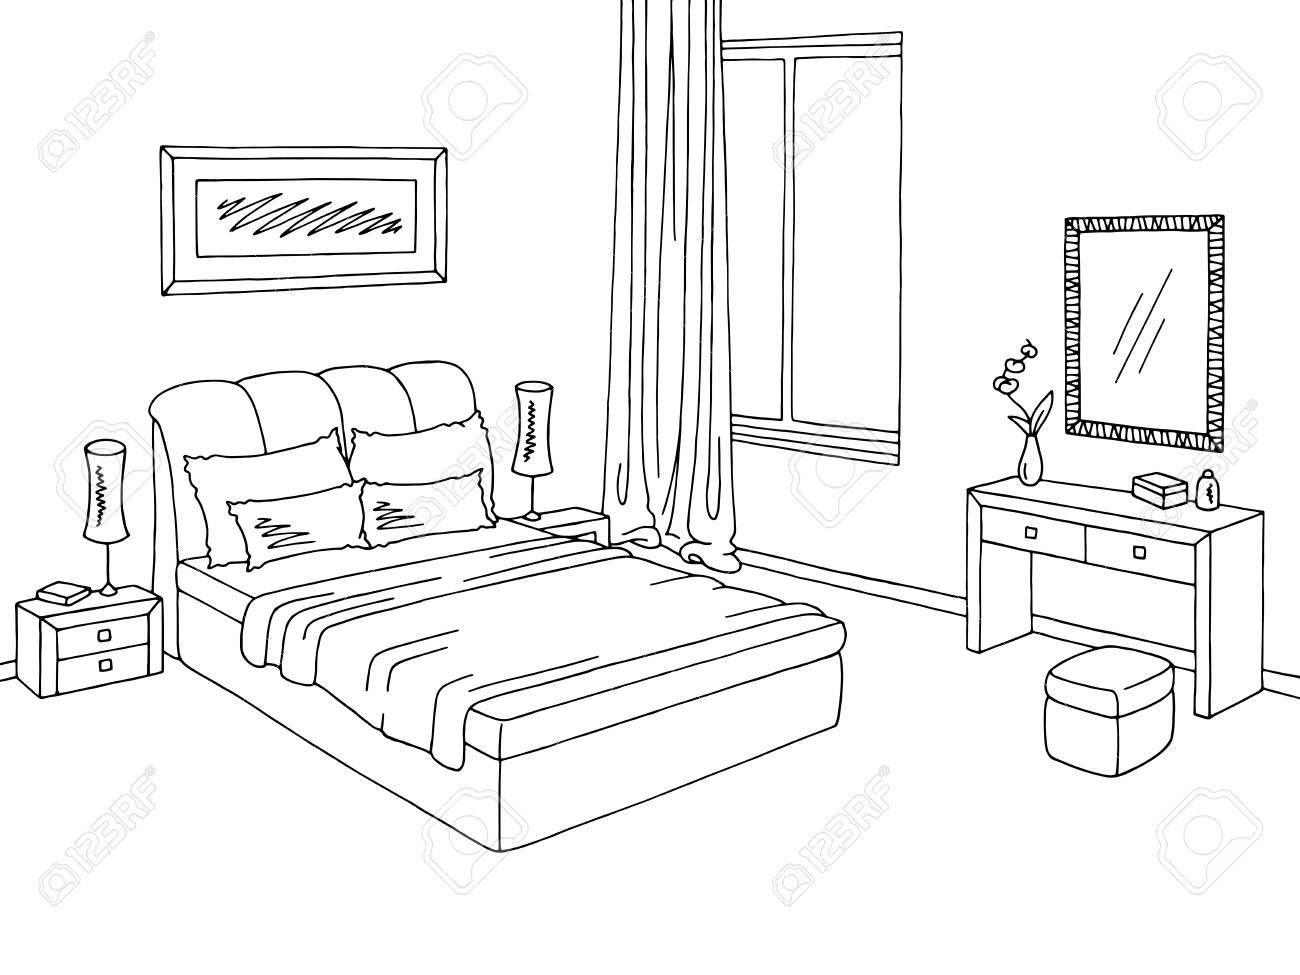 Bedroom clipart black and white 4 » Clipart Station.